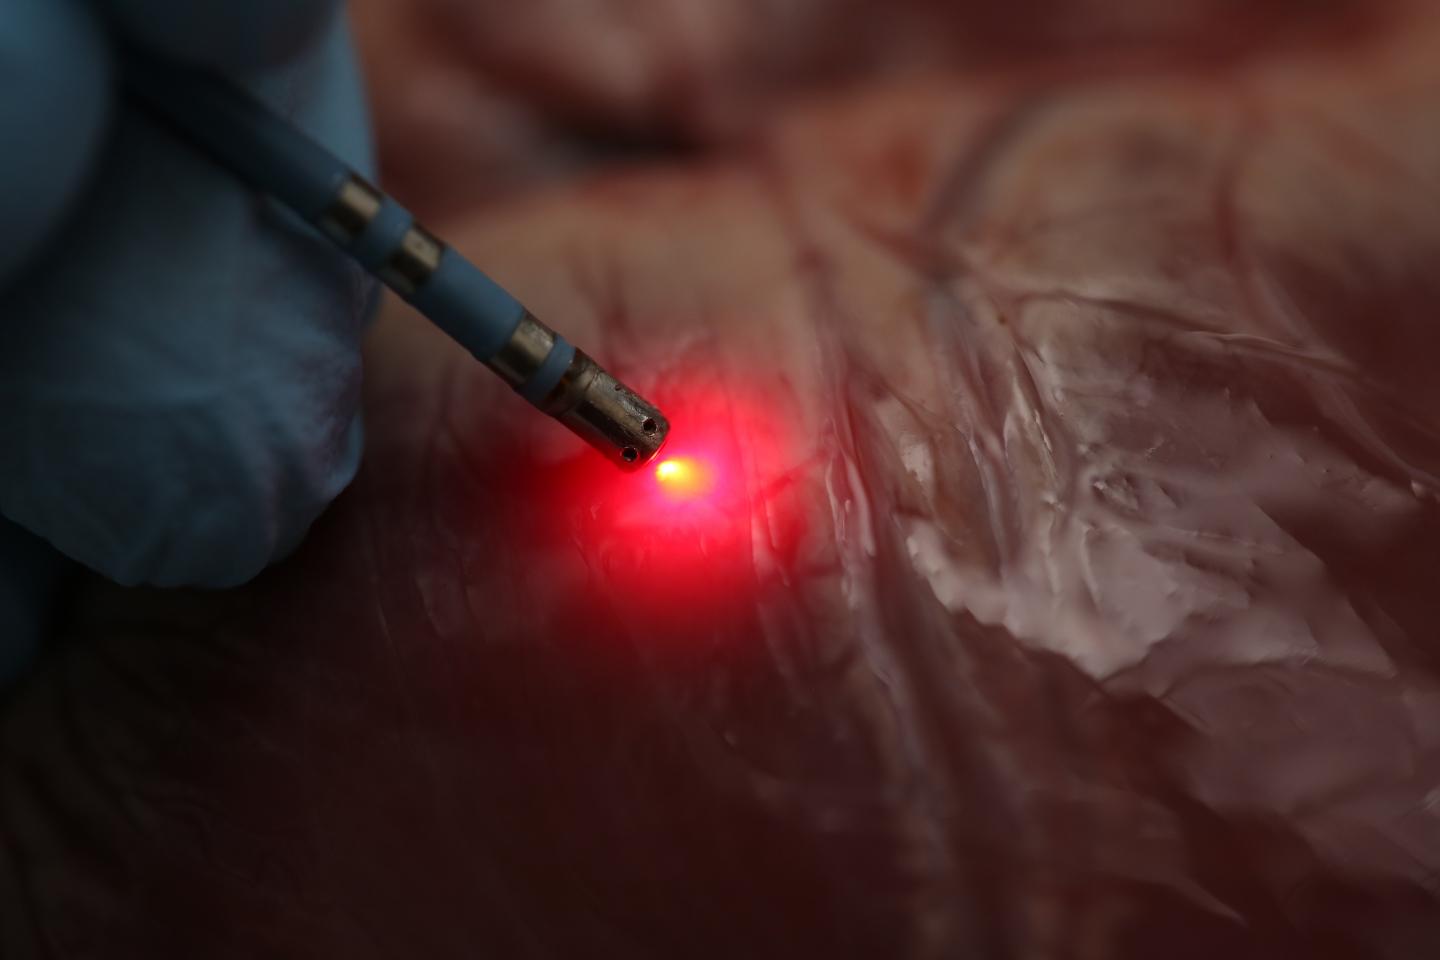 A new ablation catheter incorporating near-infrared spectroscopy mapping can successfully distinguish various tissue types in hearts. This distinction is critical when using radiofrequency ablation to treat heart rhythm problems. Courtesy of Christine P. Hendon, Columbia University and John Abbott.